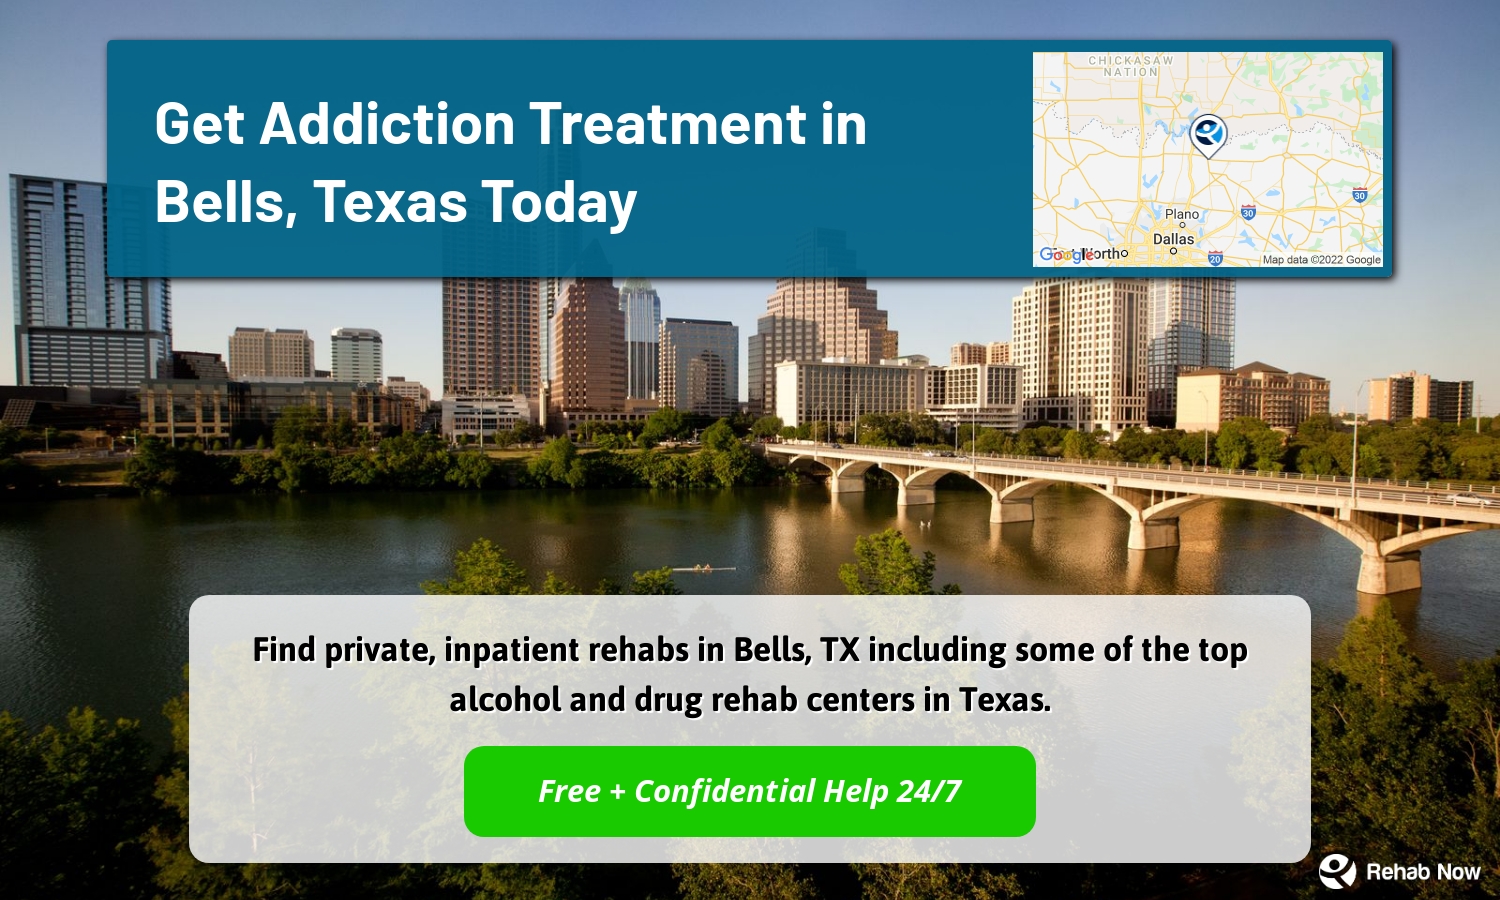 Find private, inpatient rehabs in Bells, TX including some of the top alcohol and drug rehab centers in Texas.